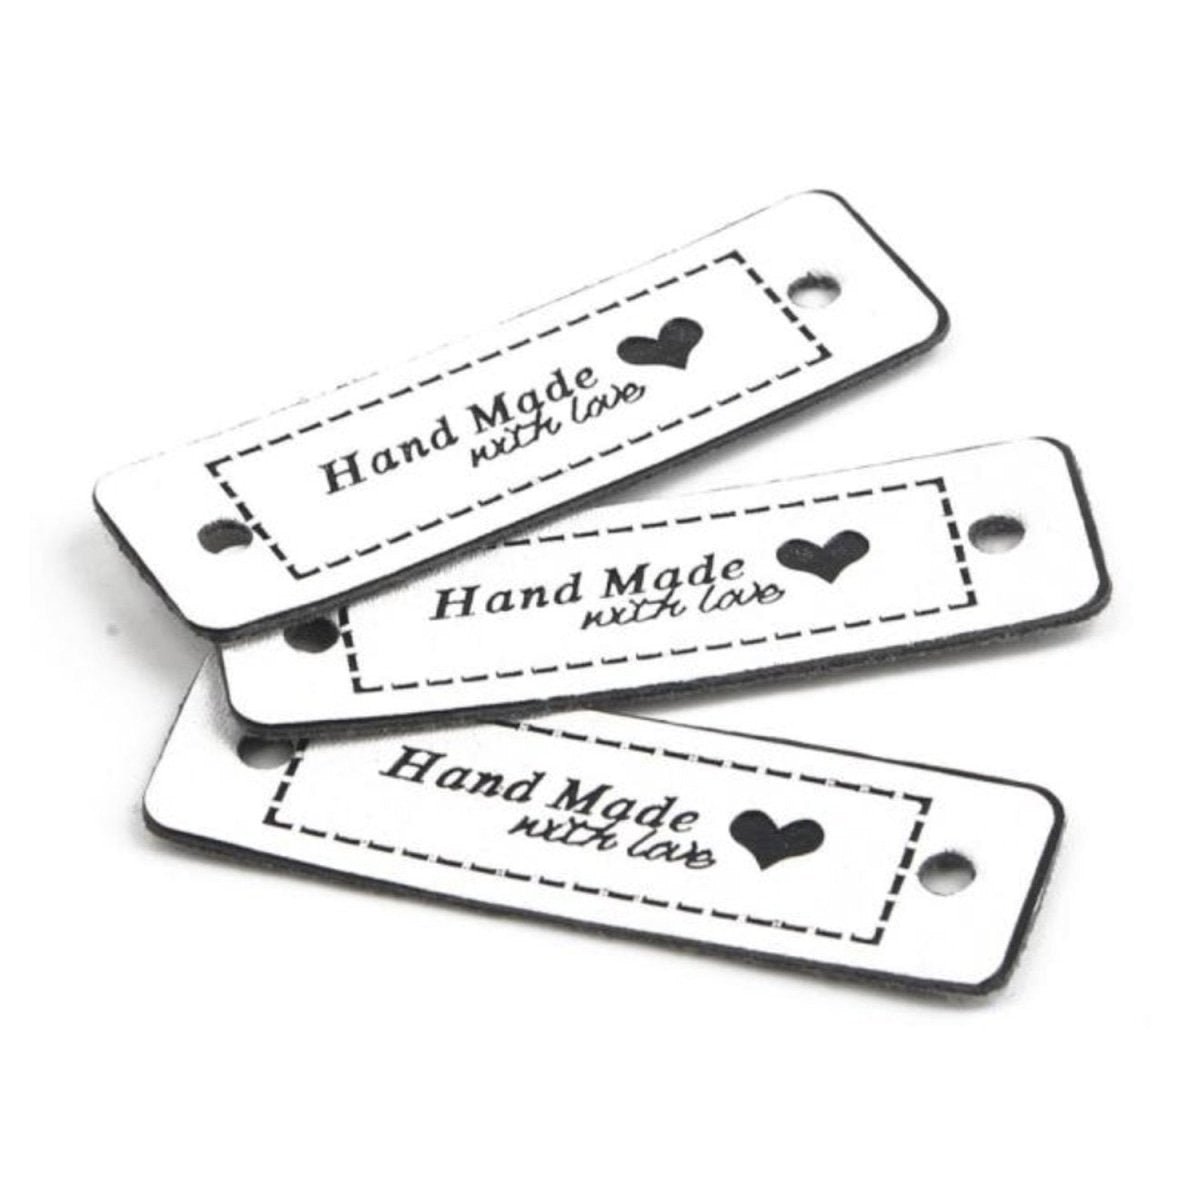 12pcs Faux Leather Clothing Labels for Handmade Clothes Goods DIY Sewing Tags Hand Made - Black White - - Asia Sell